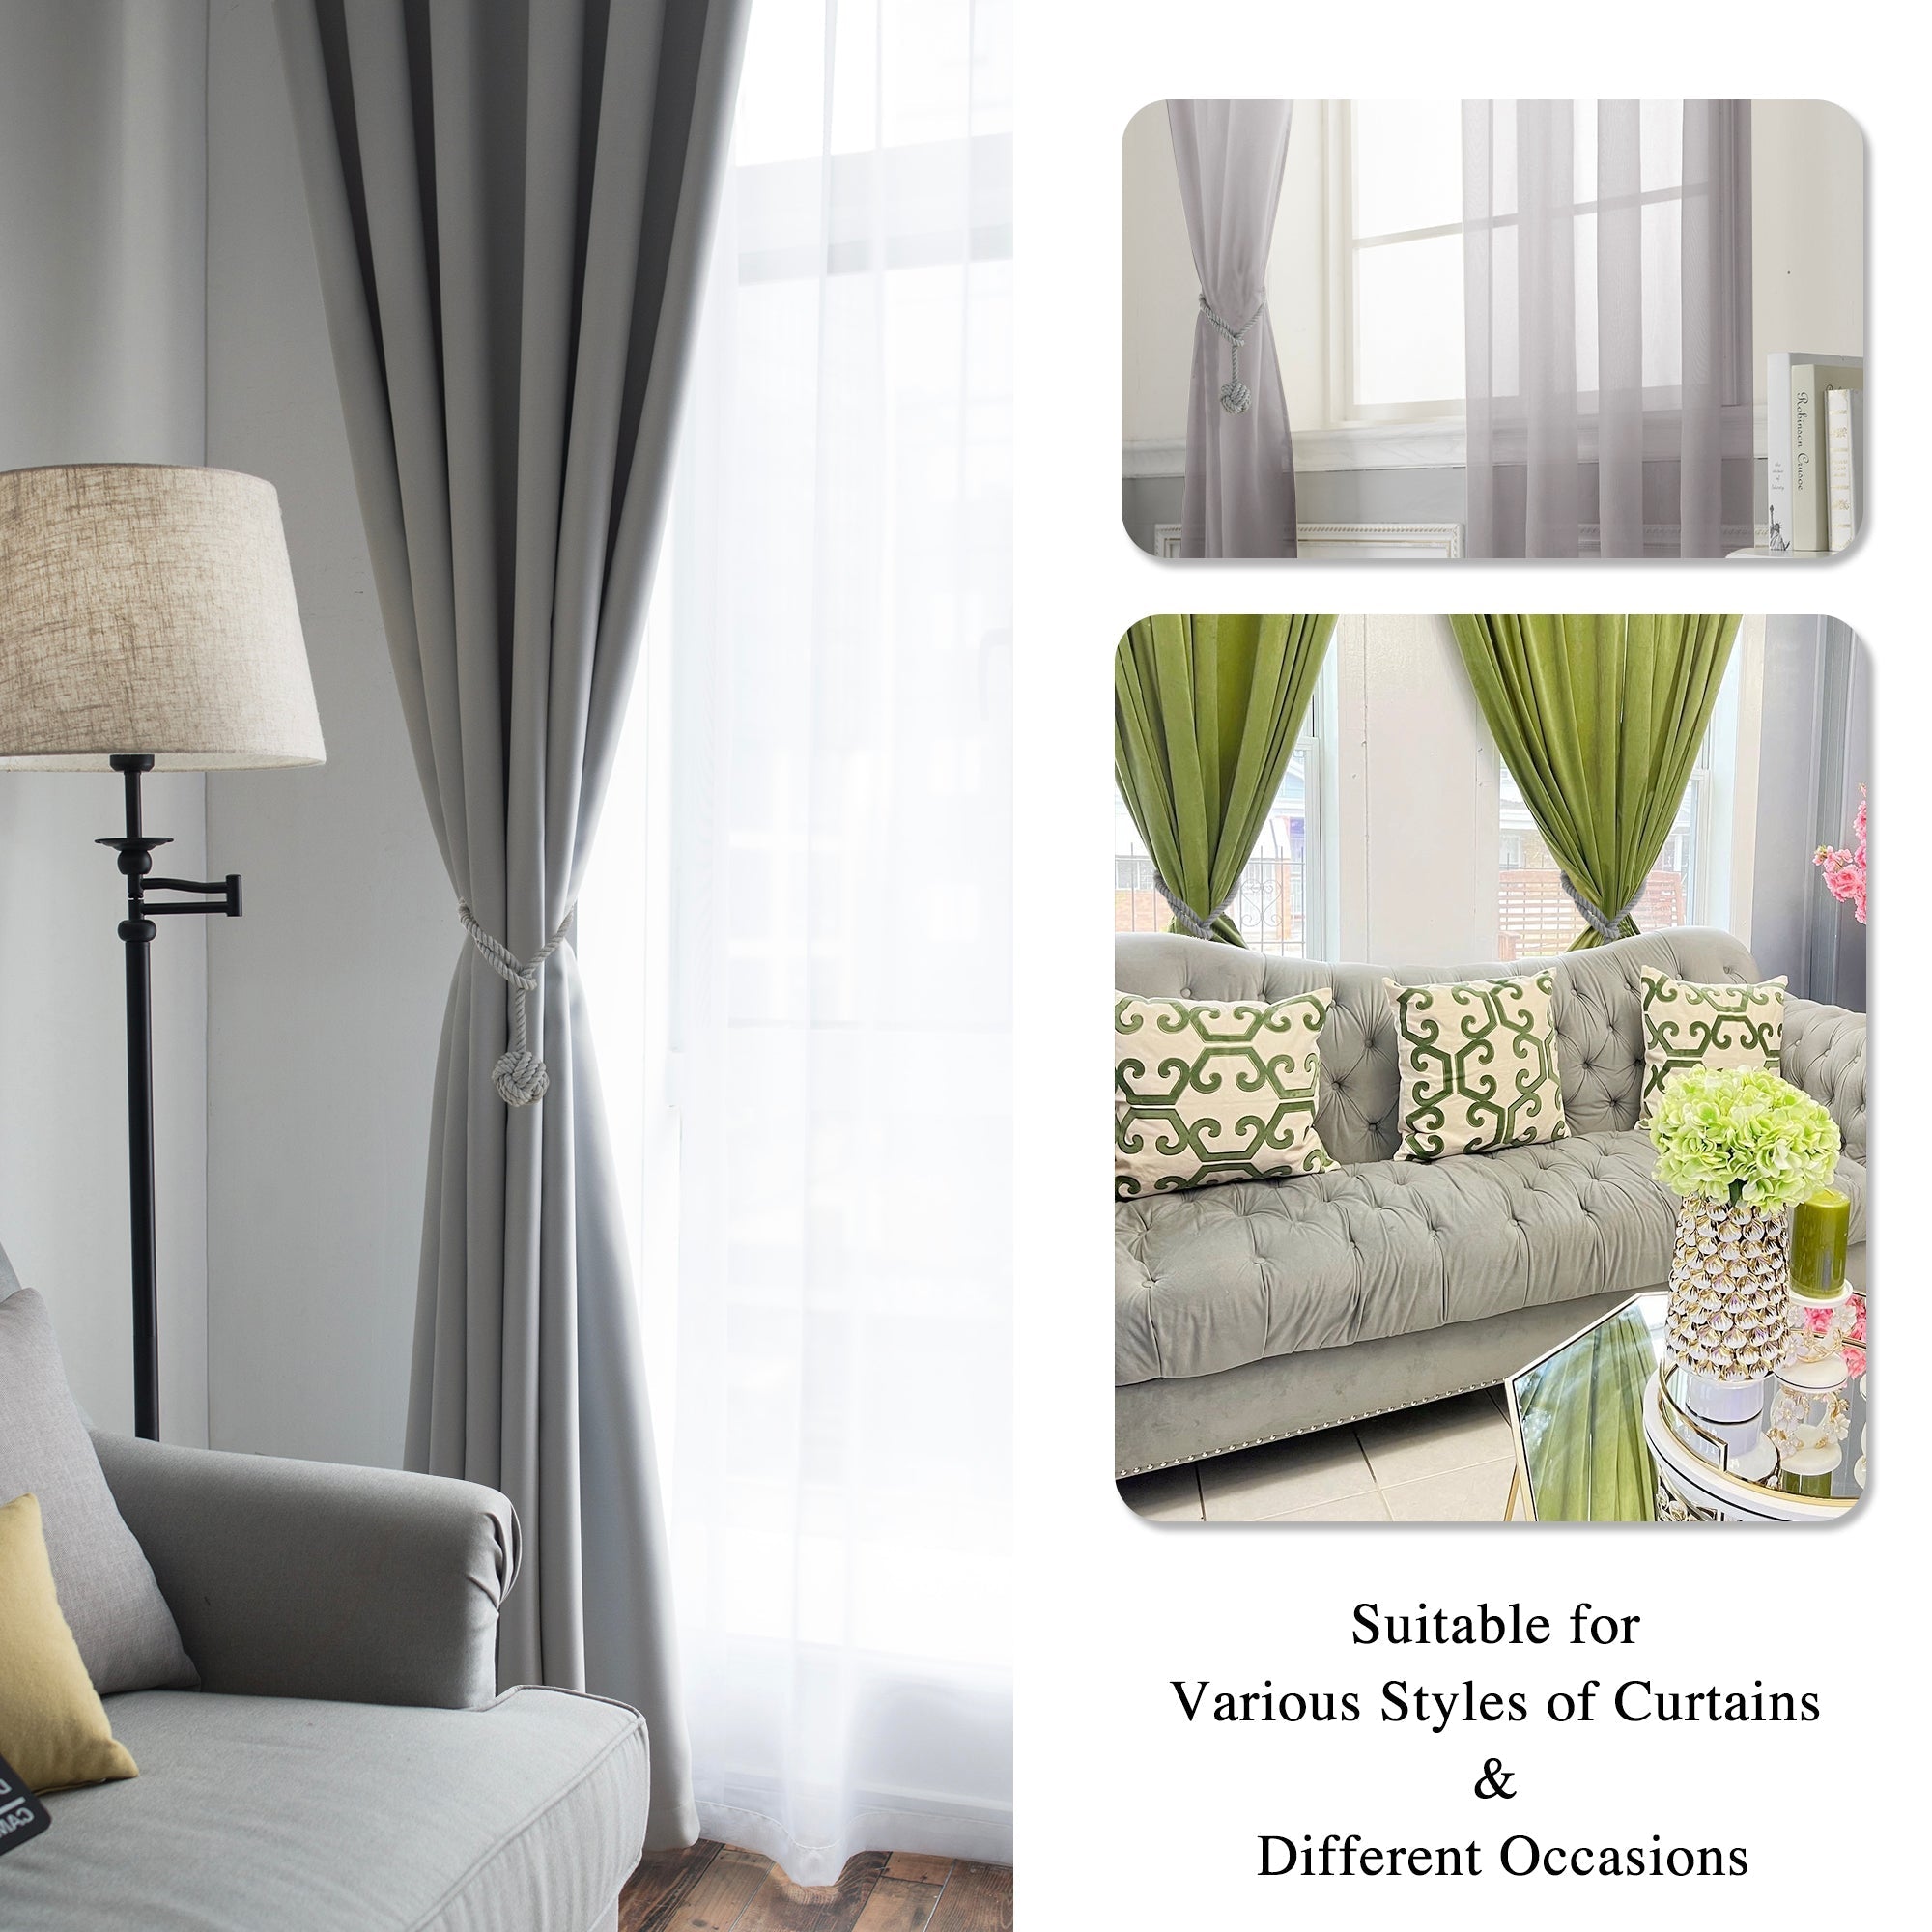 Add Pleats to Our Drapes Triple or Double Pinch Pleated Curtains Fan Fold  or French/euro Pleat Custom Drapes With Hooks 